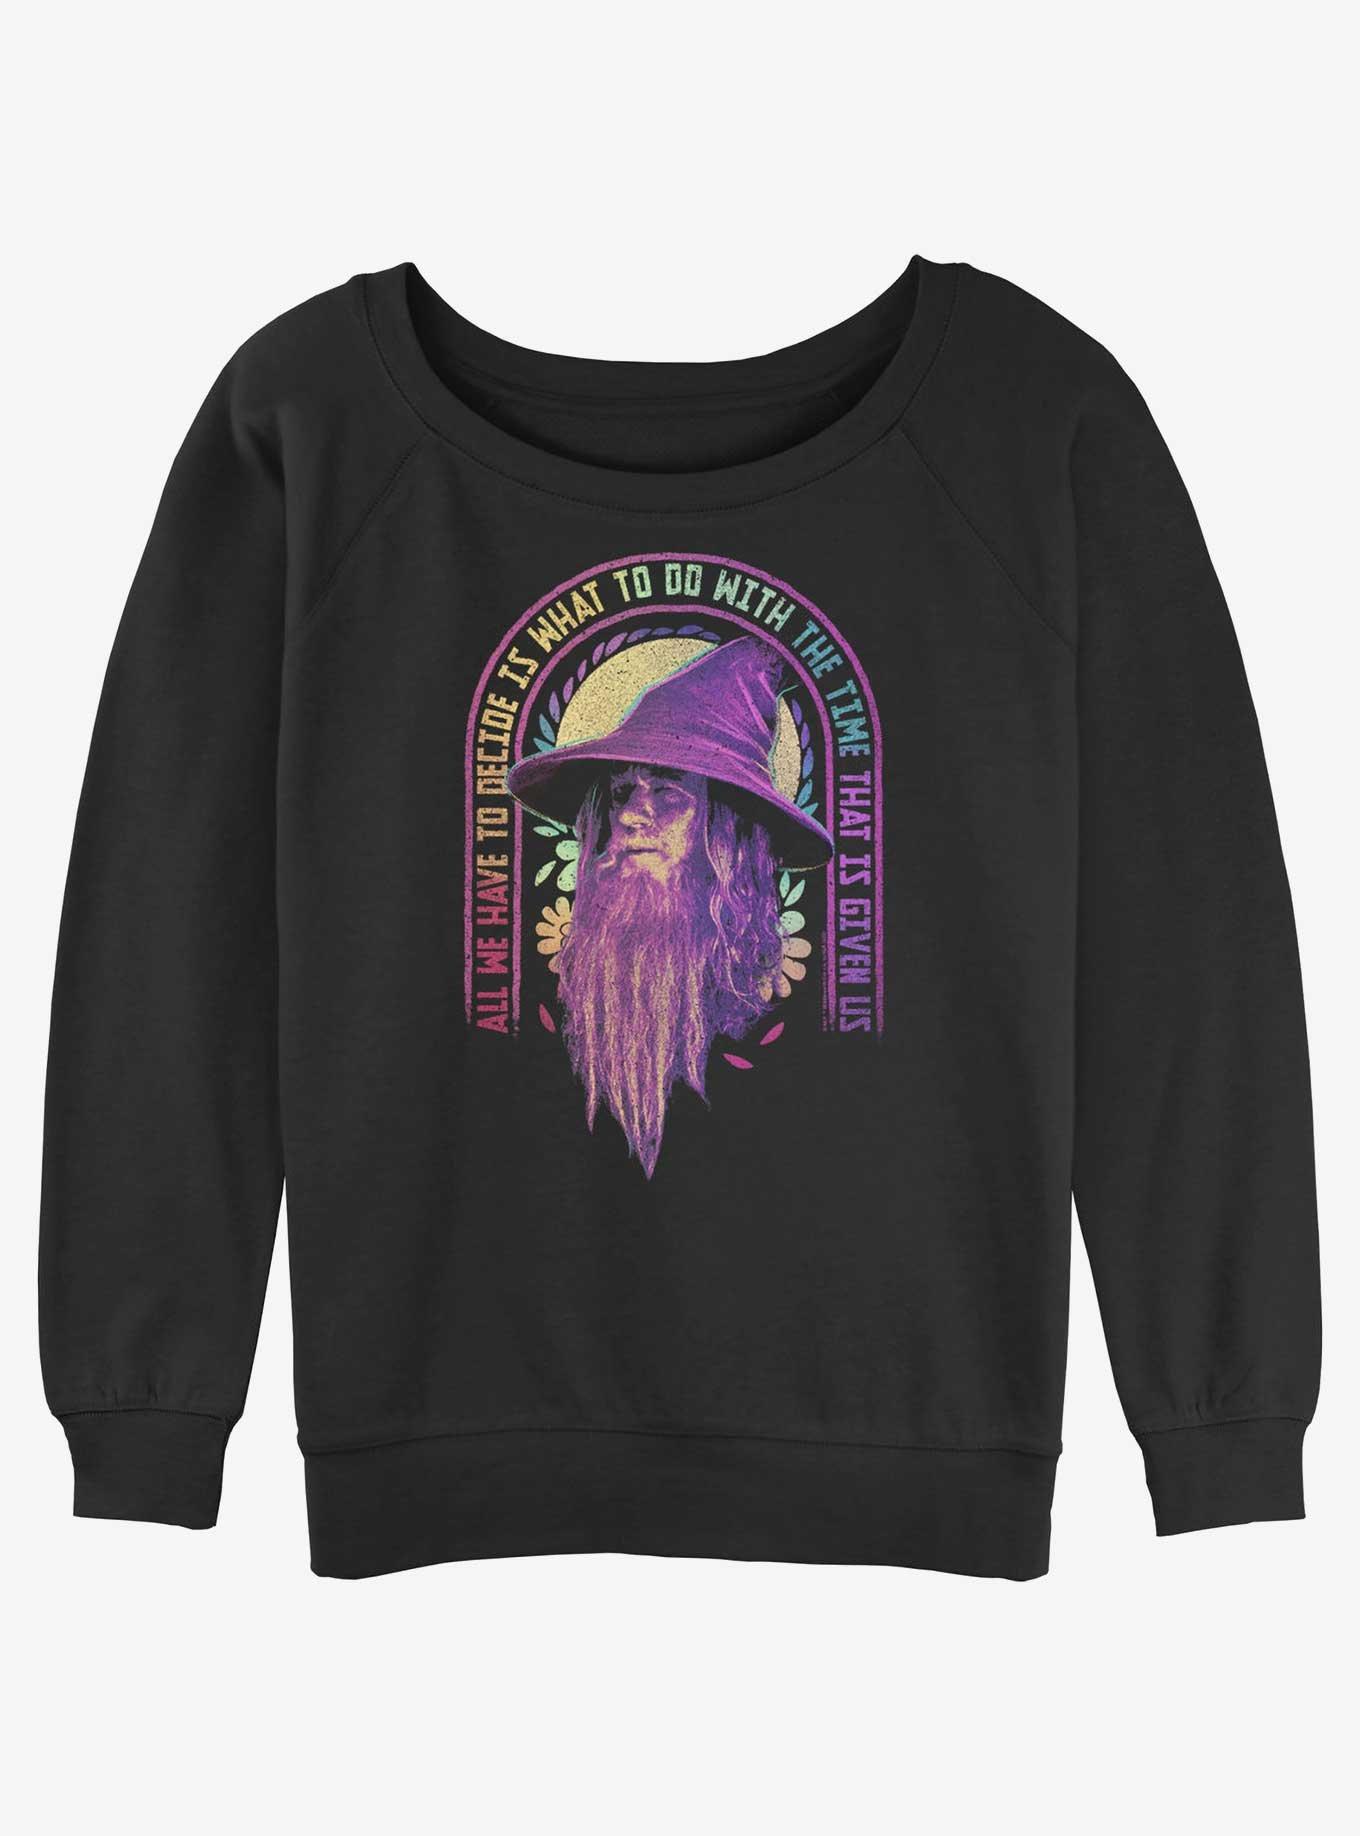 The Lord of the Rings Gandalf Decide With Time Girls Slouchy Sweatshirt, BLACK, hi-res